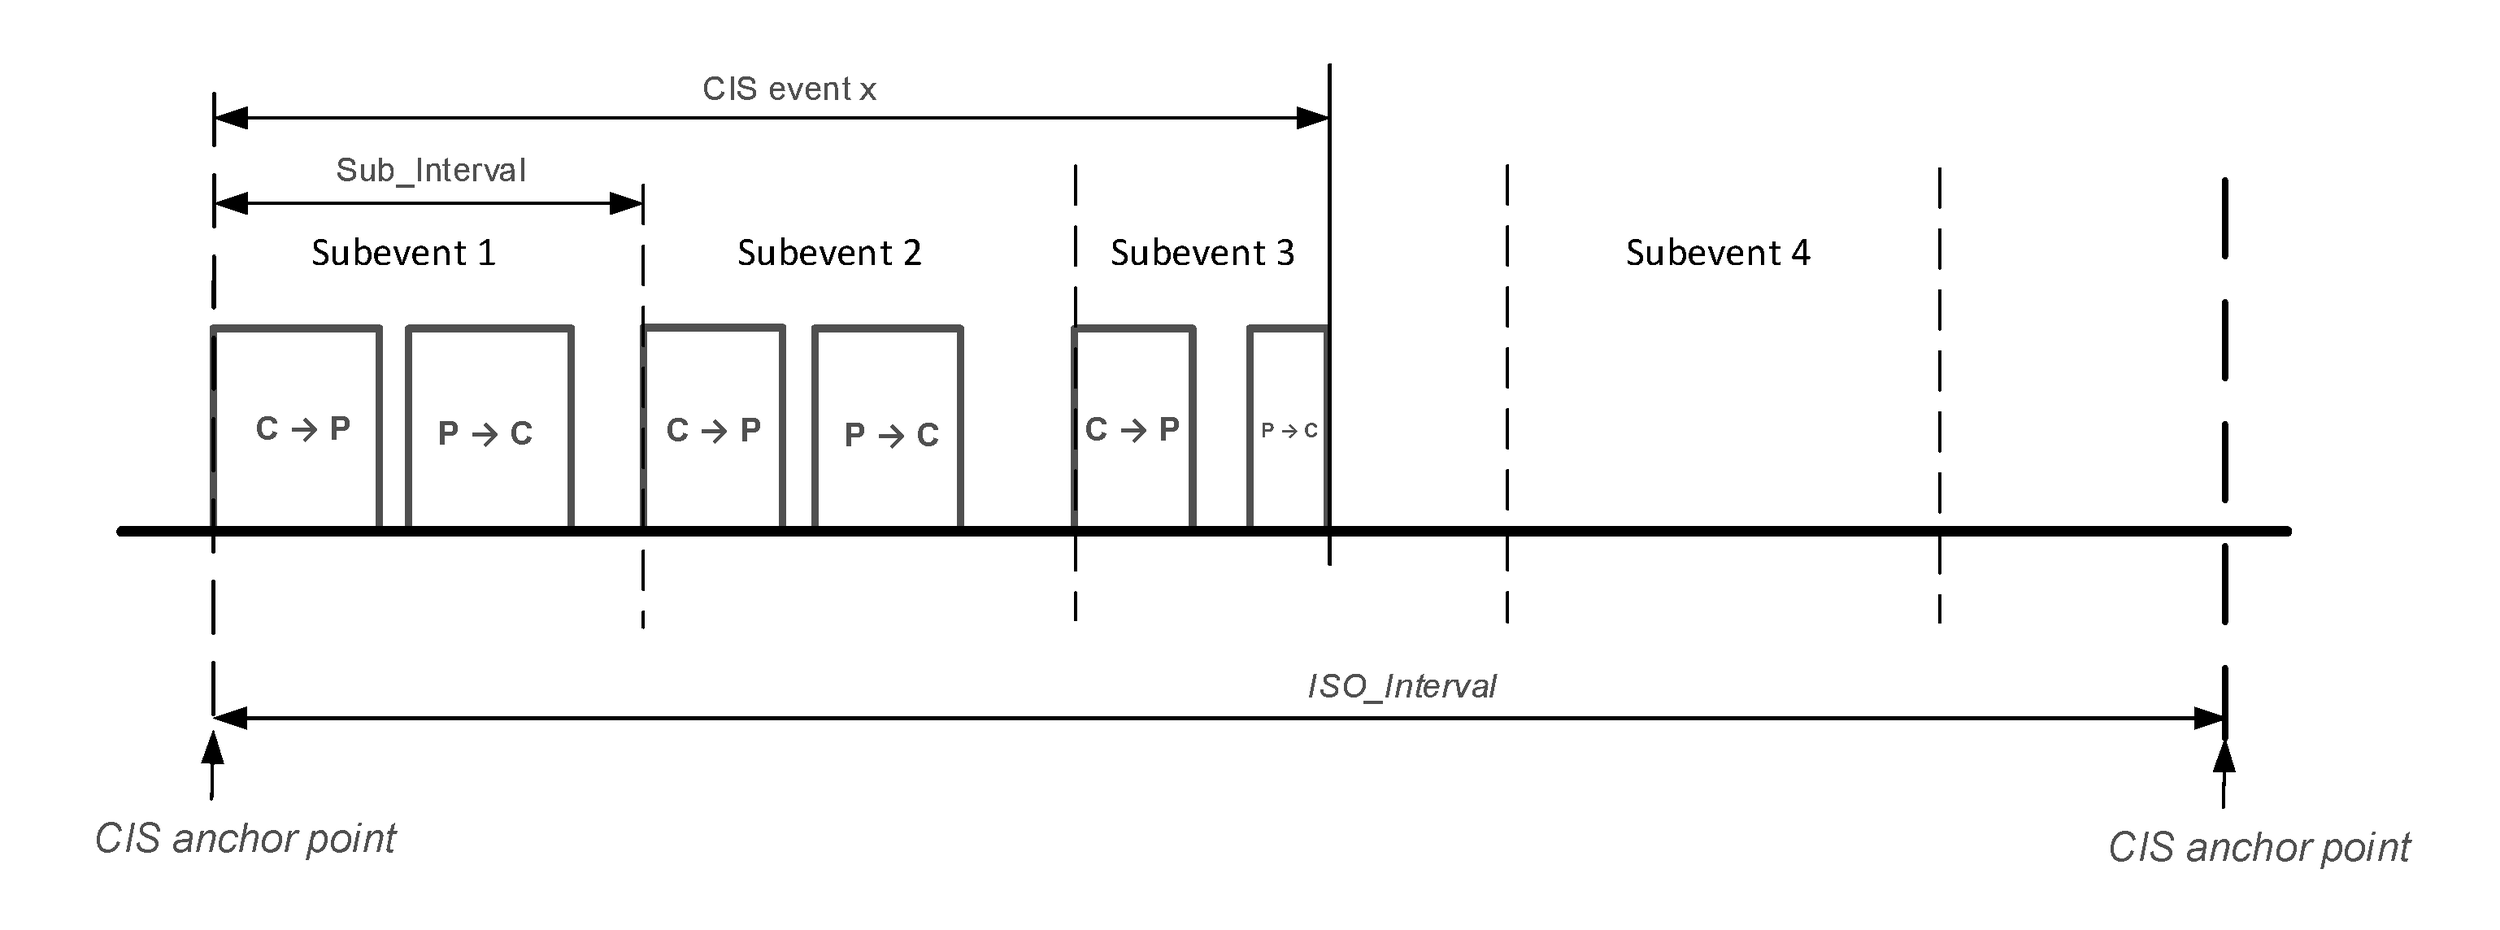 Example of a CIS event in a CIS with NSE = 4 and 3 actual subevents